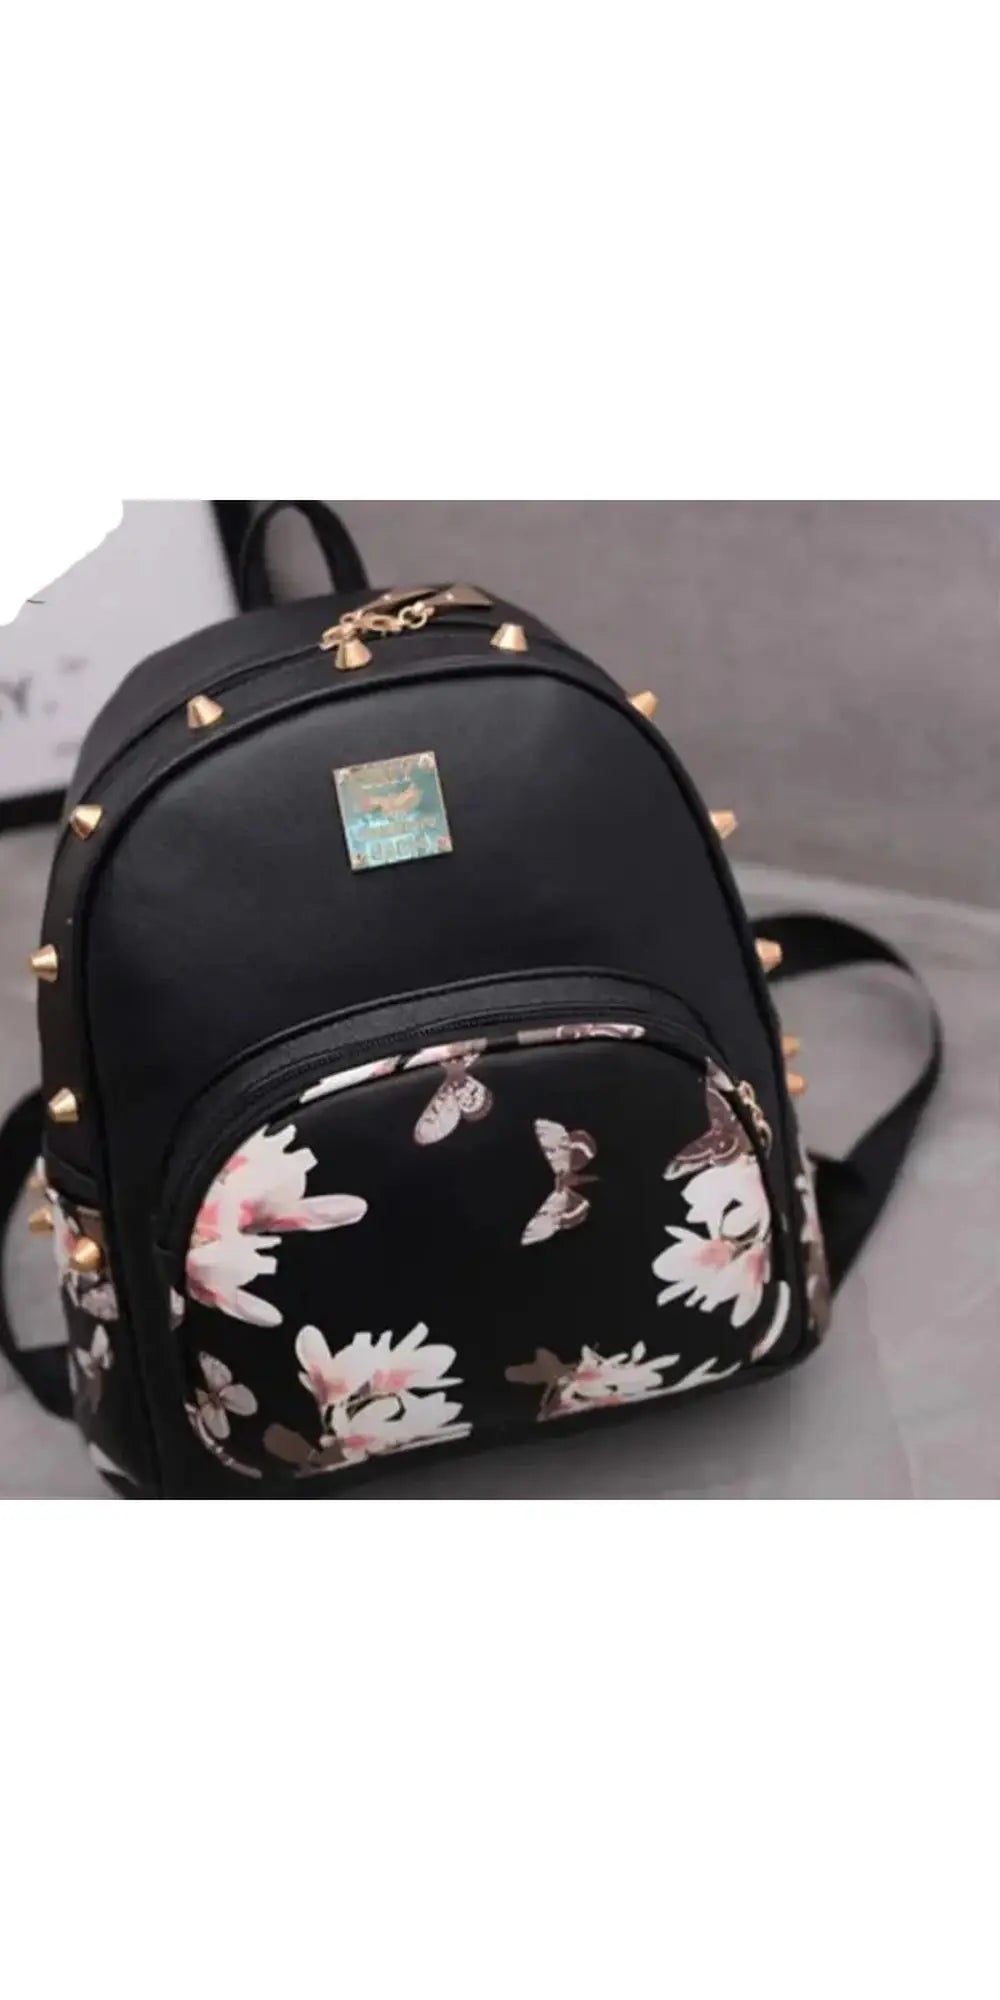 Floral print backpack - Black Butterfly - bags